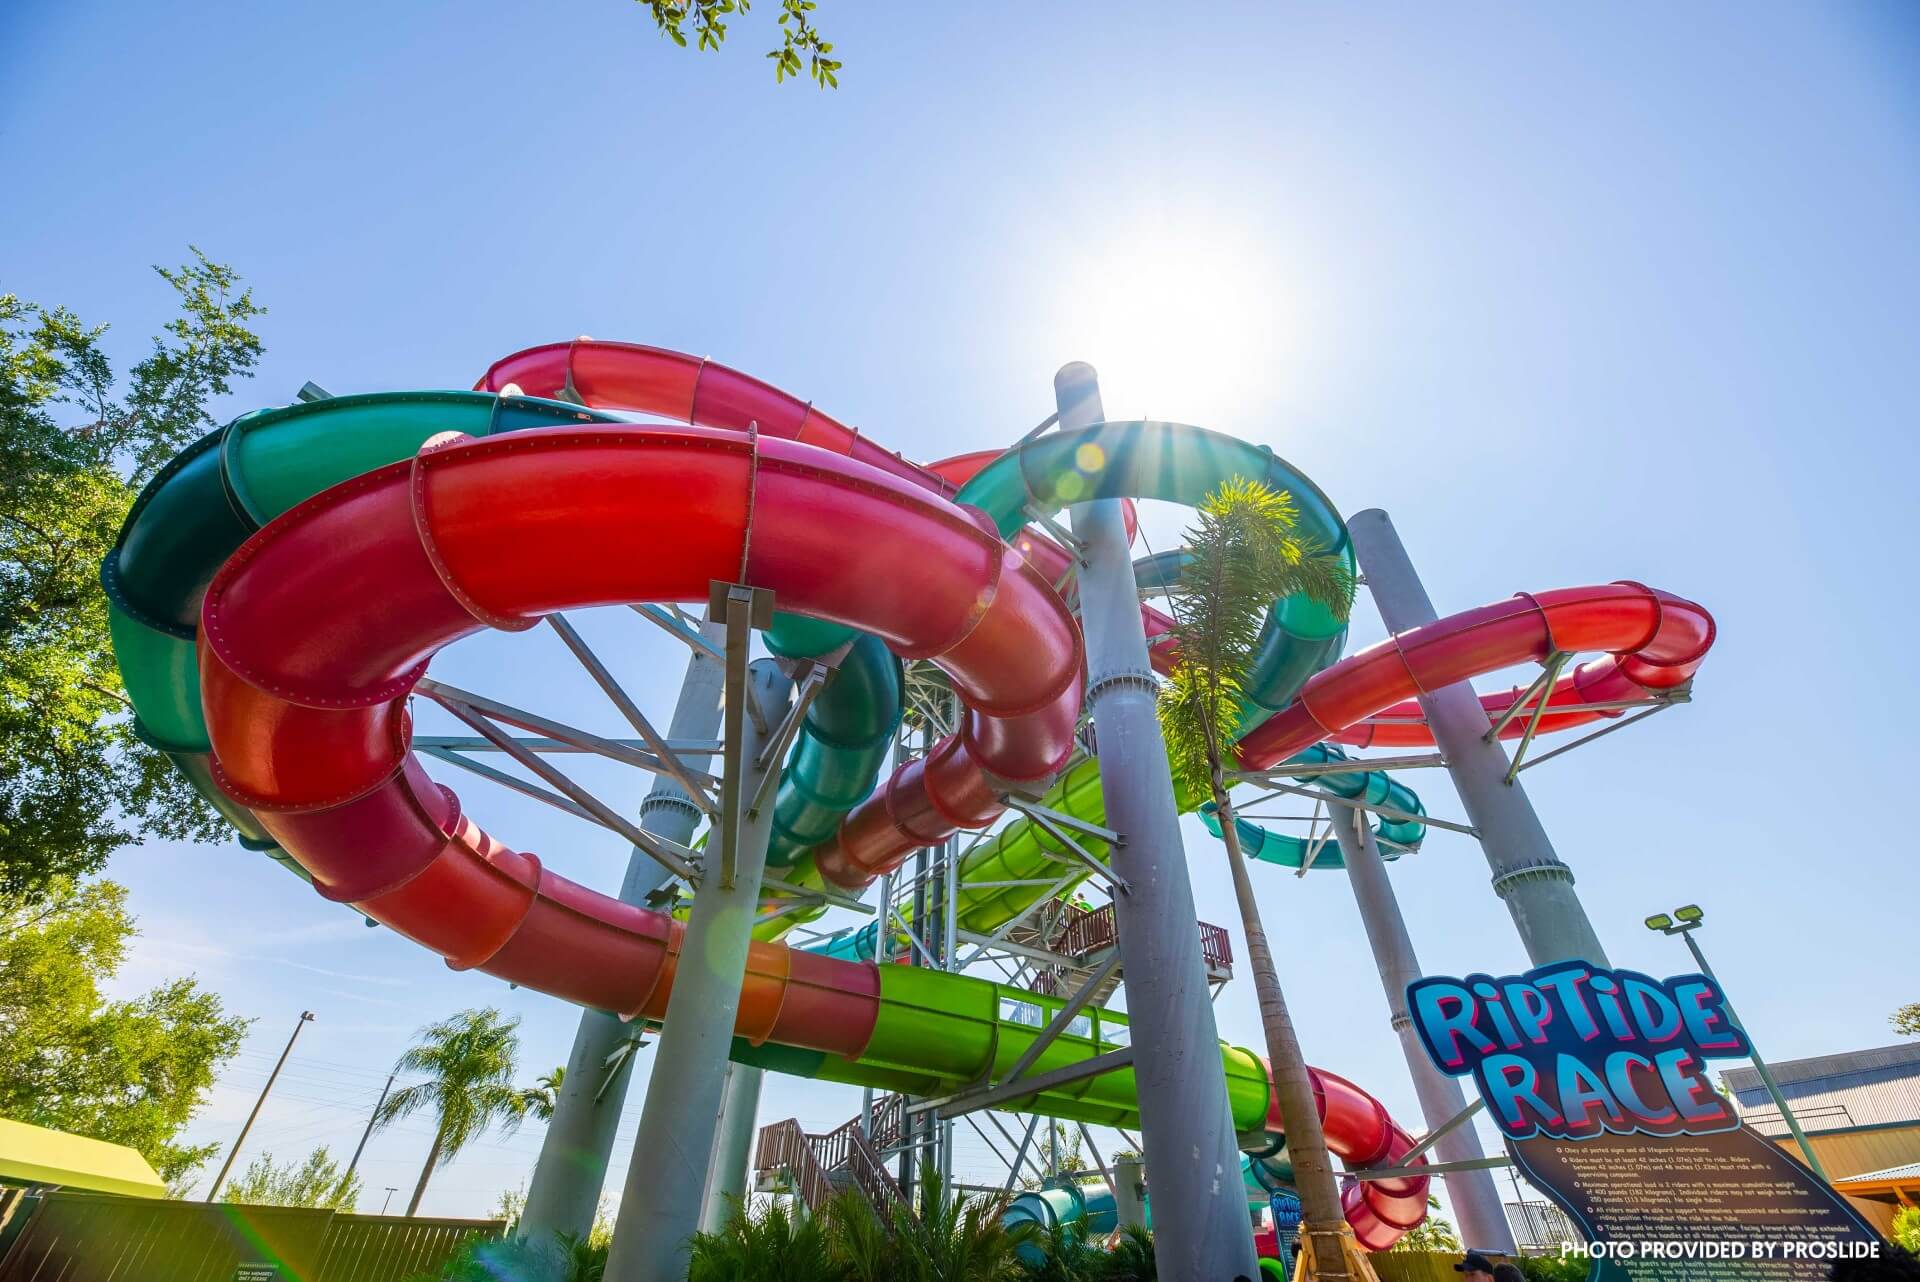 Newest Martin Aquatic-Engineered Ride Opens at Aquatica Orlando, Named Best Waterpark in the U.S.